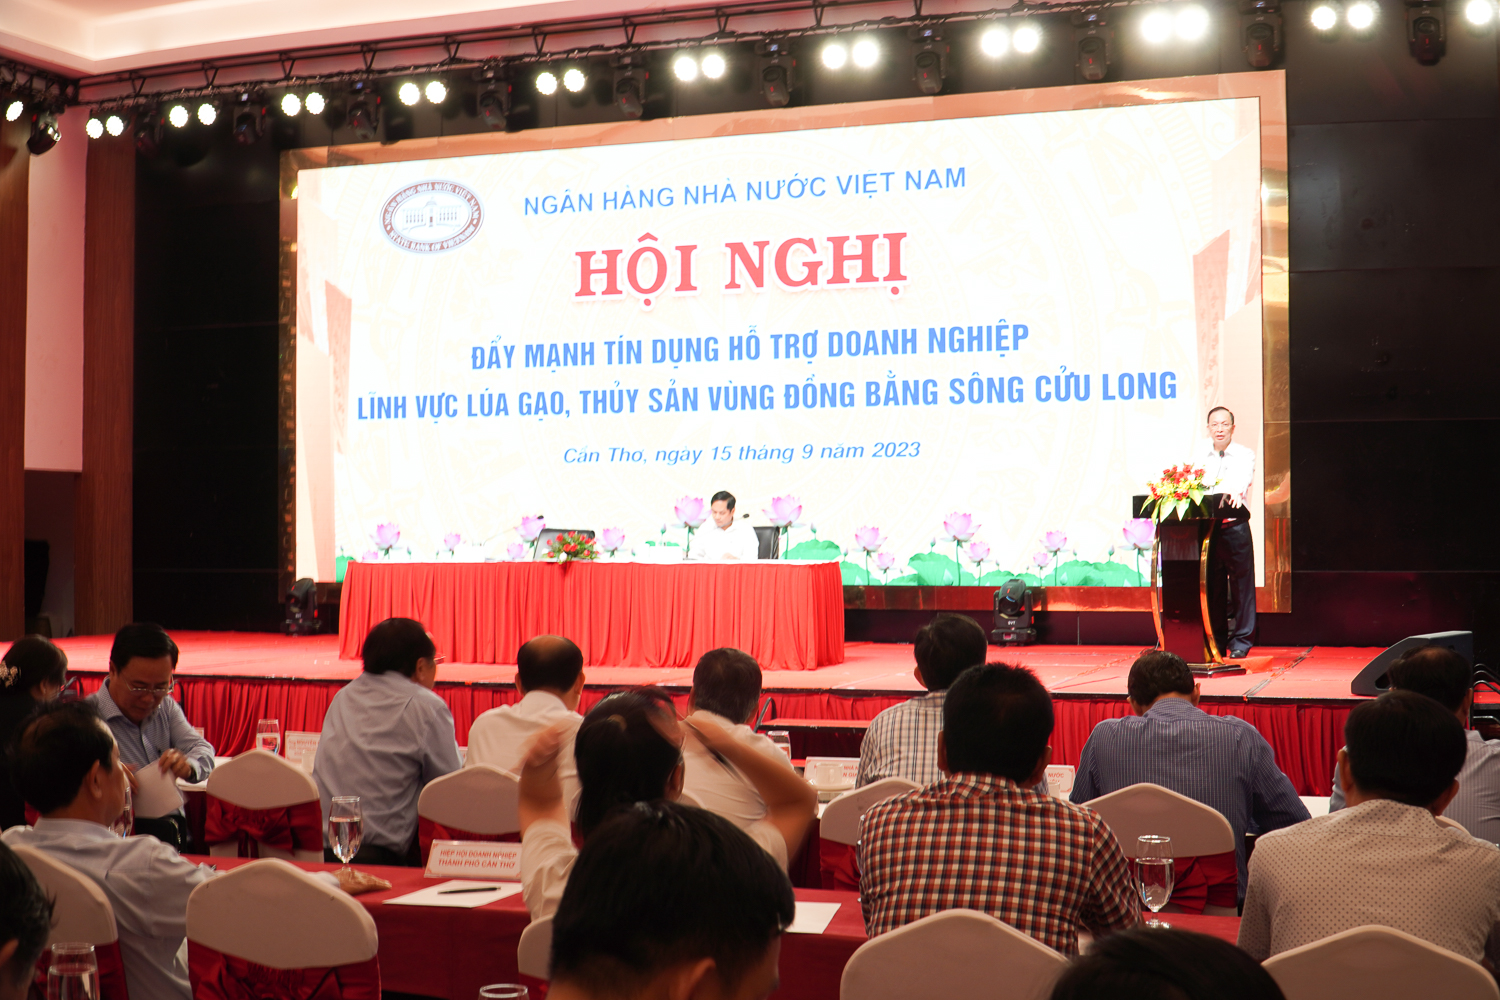 Conference to promote credit to support businesses in the rice and fisheries sectors in the Mekong Delta region organized by the State Bank of Vietnam in coordination with Can Tho City People's Committee. Photo: Kim Anh.